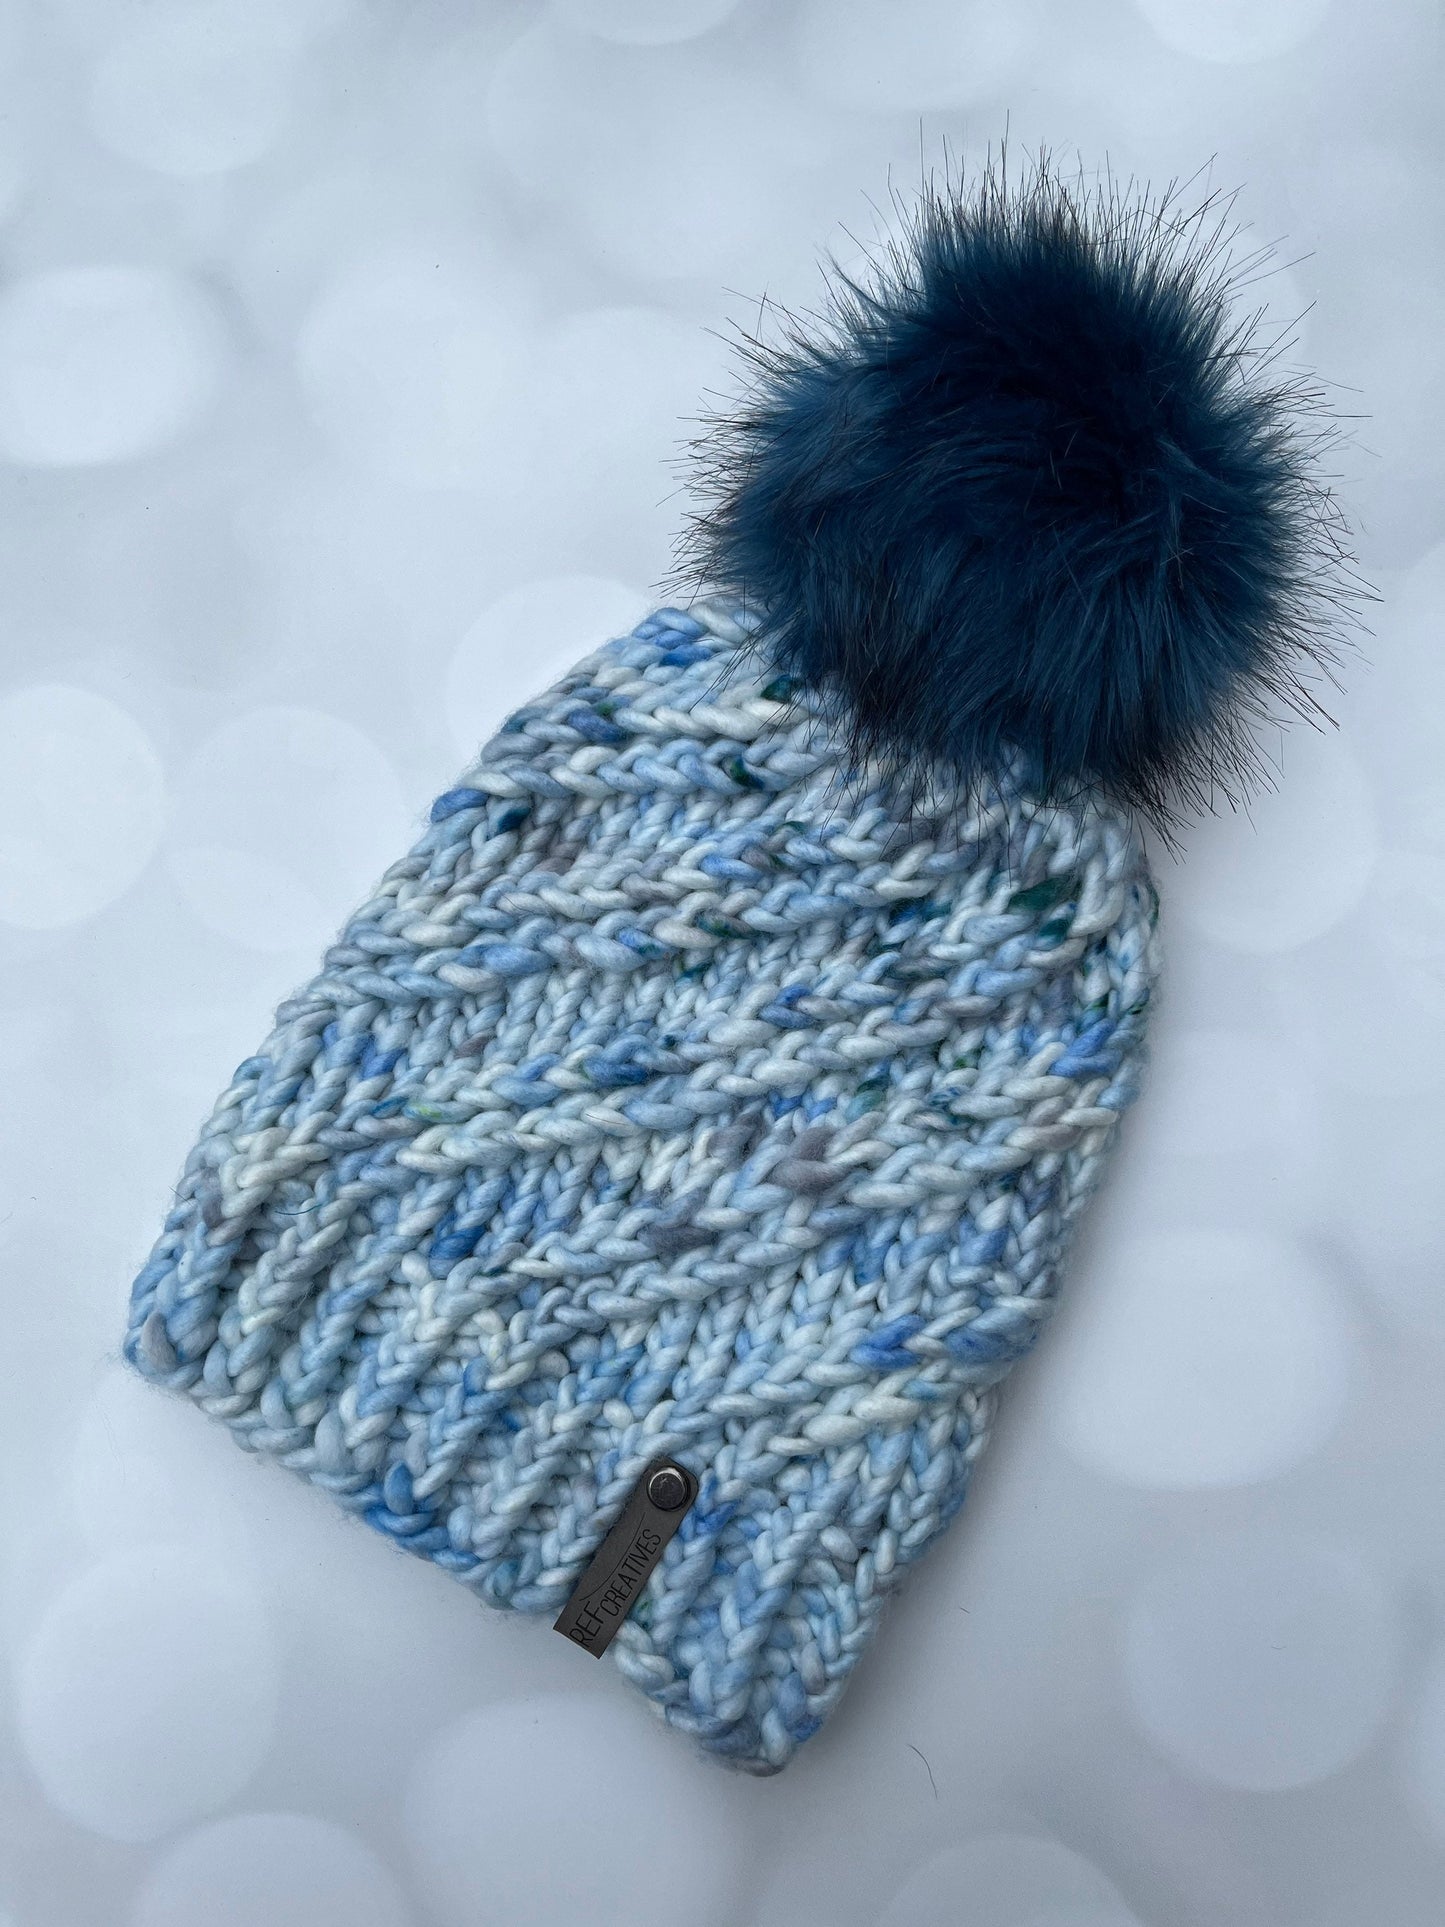 Snow Drifts Swirls Hand Knit Hat with Hand Dyed Yarn